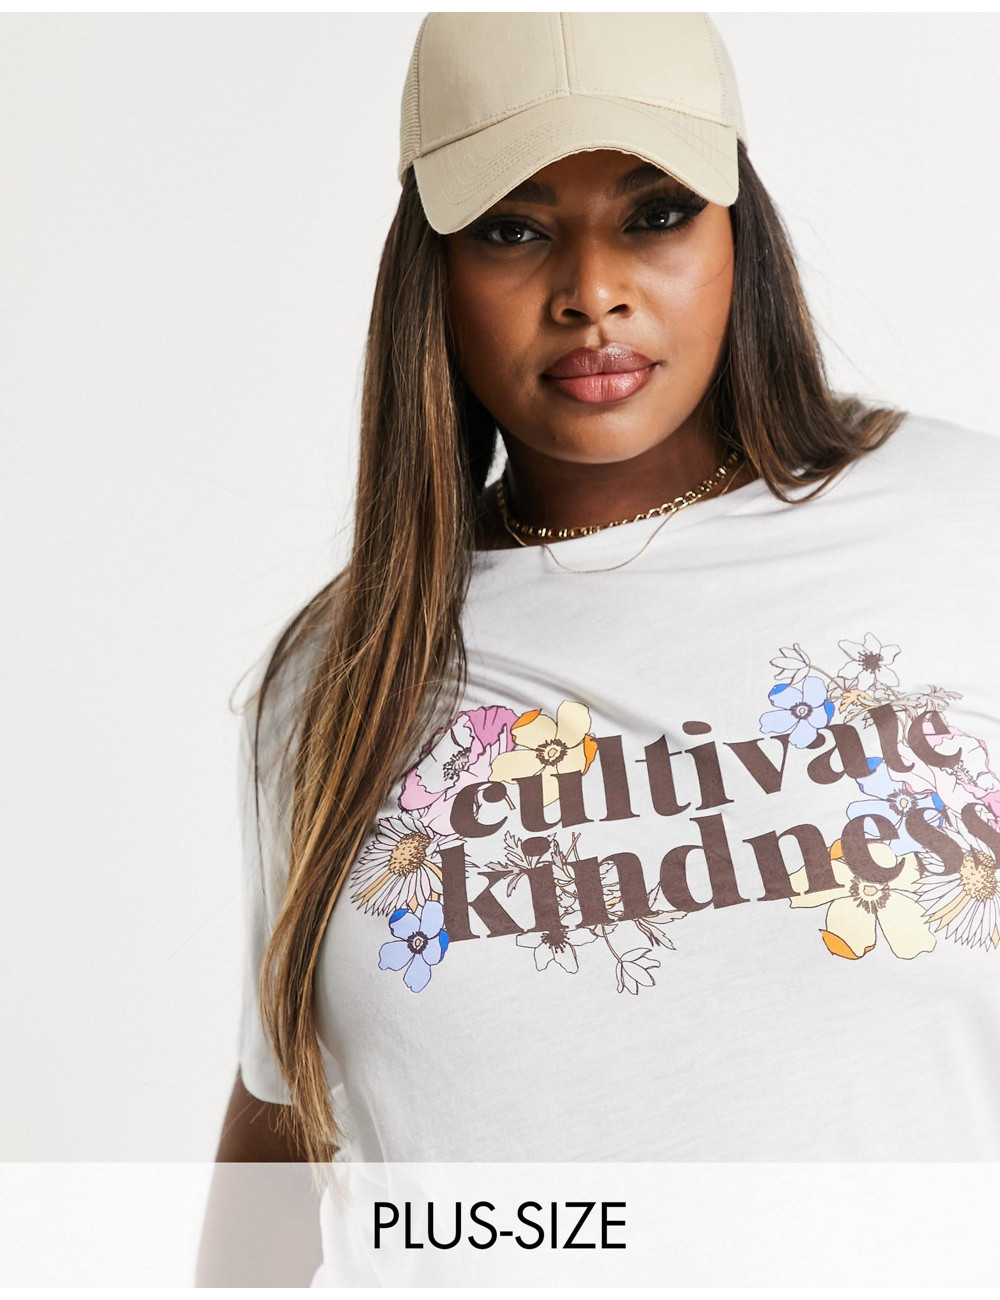 Yours 'kindness' t-shirt in...